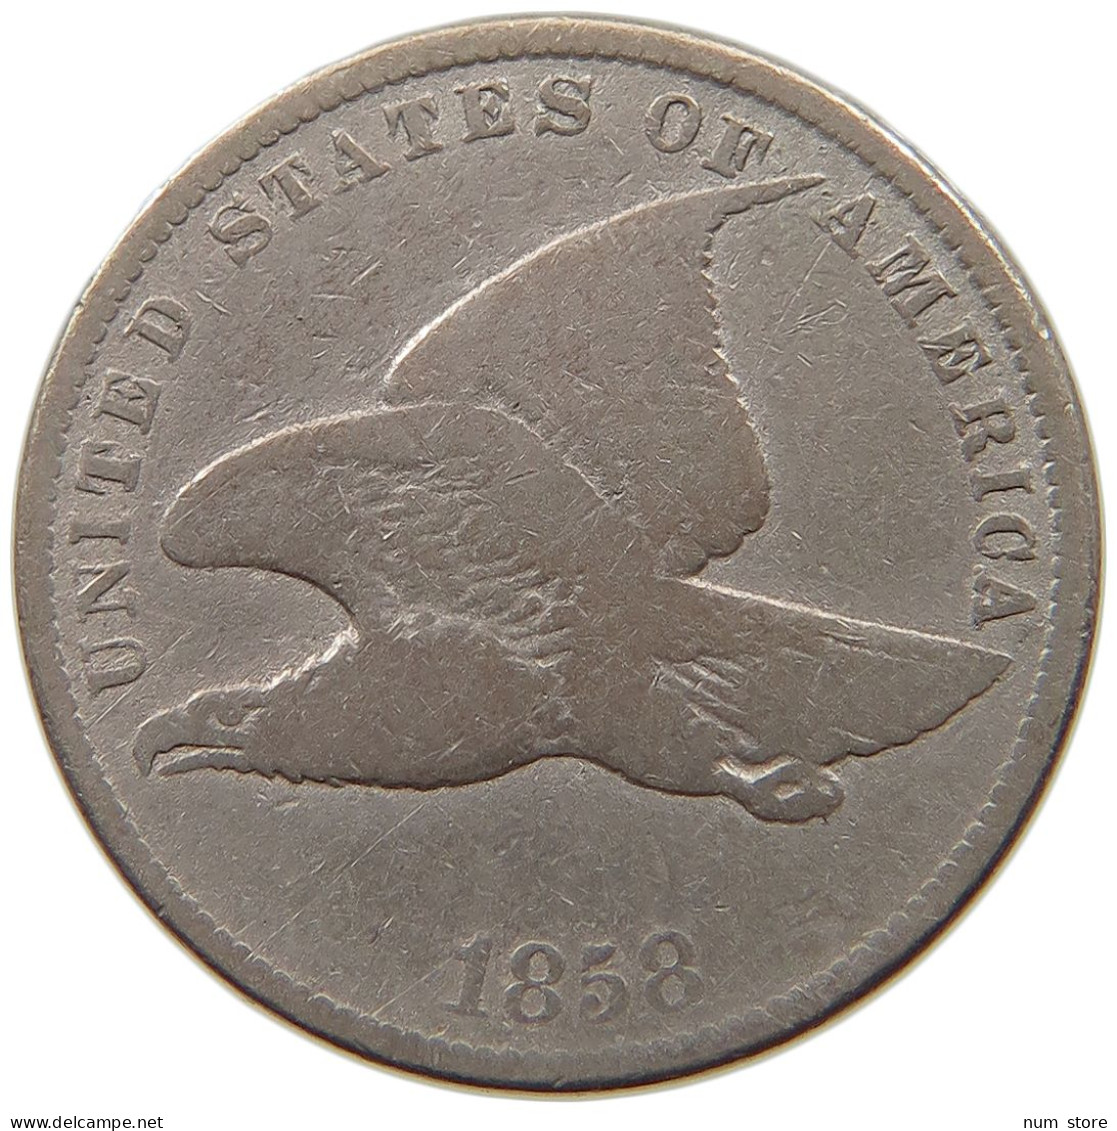 UNITED STATES OF AMERICA CENT 1858 FLYING EAGLE #a034 0887 - 1856-1858: Flying Eagle (Aigle Volant)